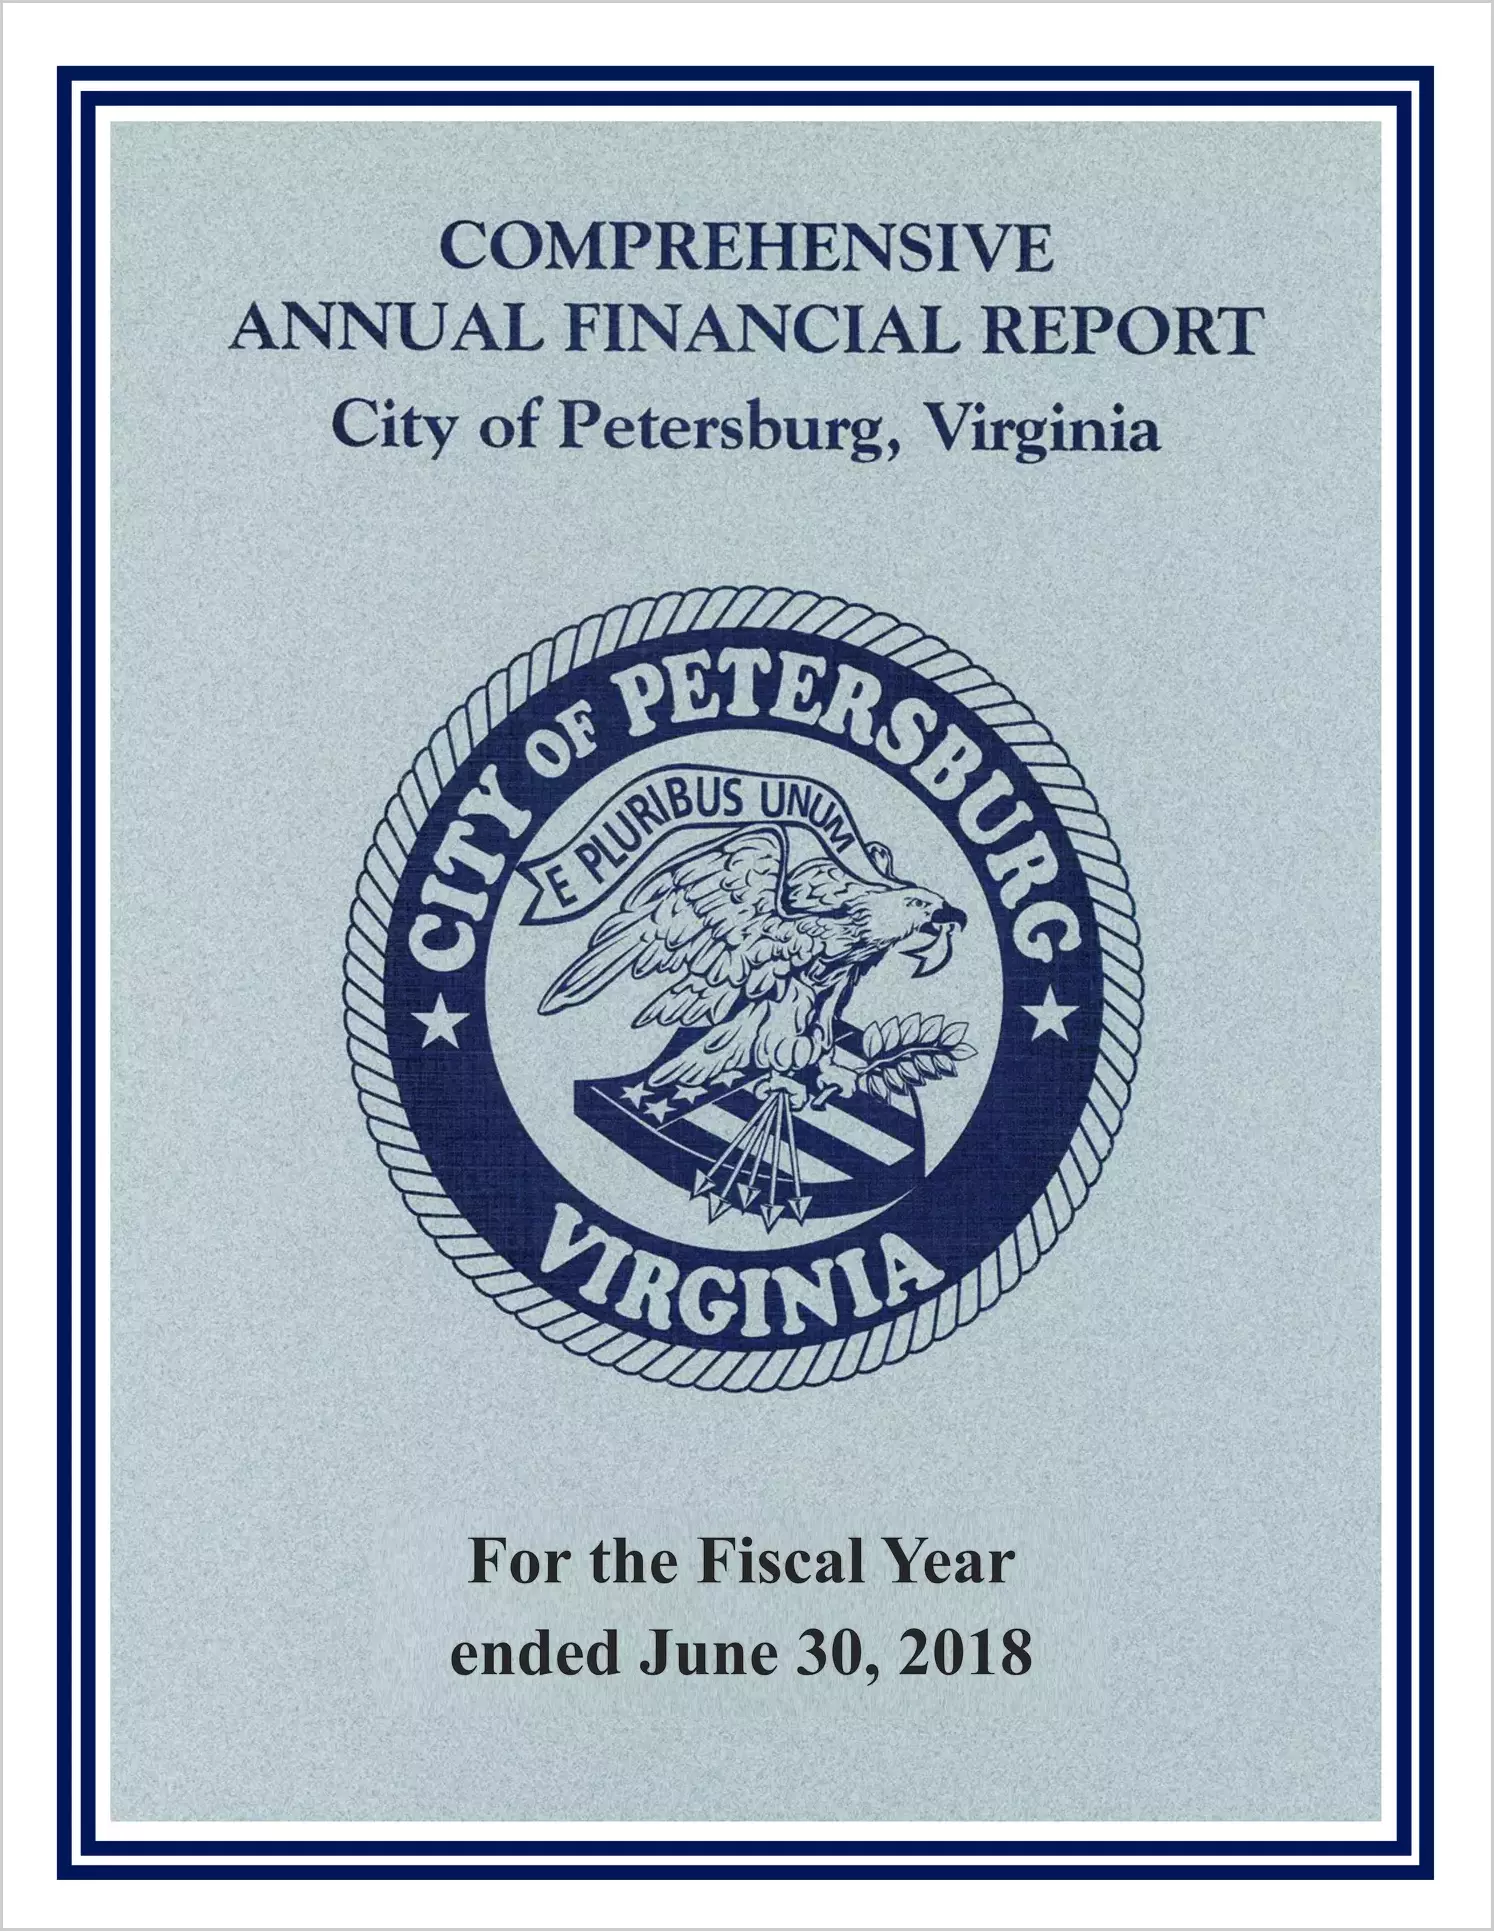 2018 Annual Financial Report for City of Petersburg